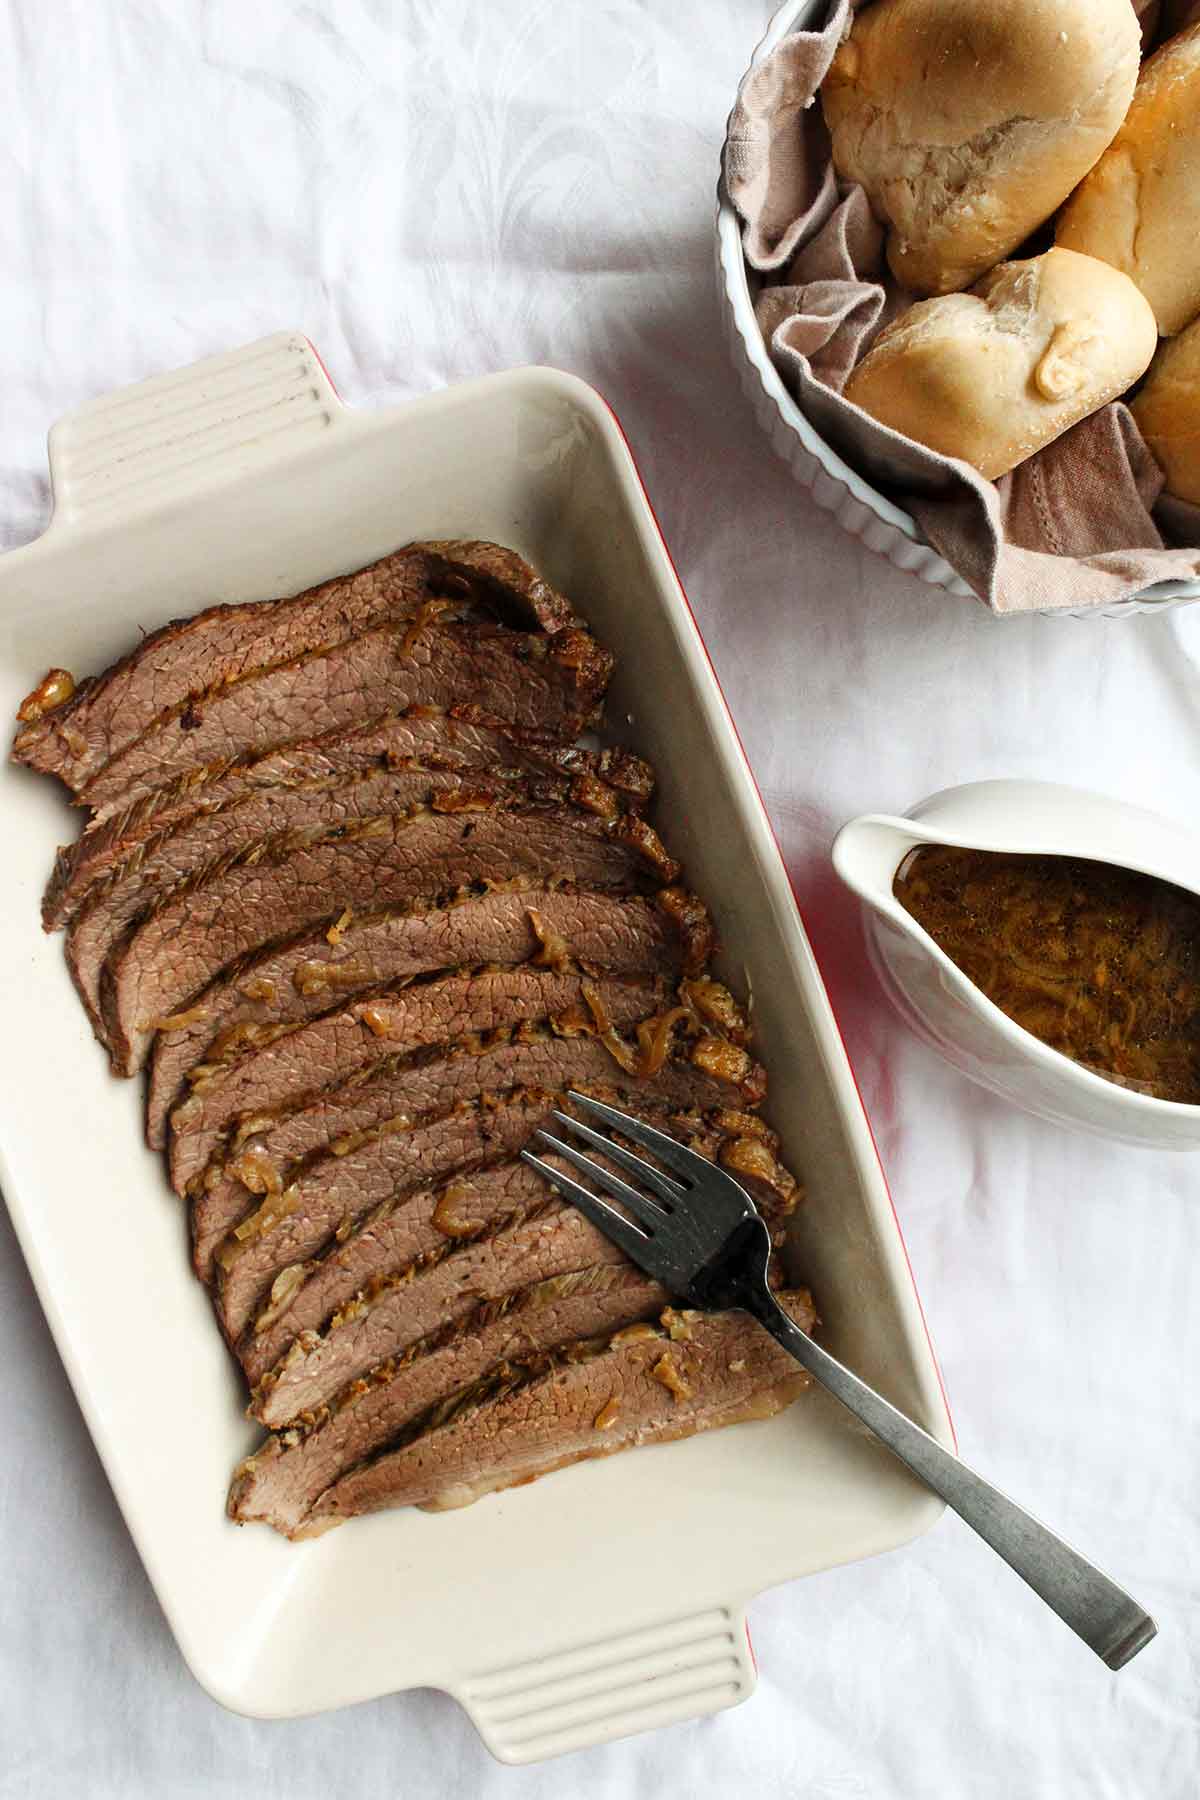 A sliced beef brisket in a baking dish with a gravy boat and basket of bread rolls on the side.